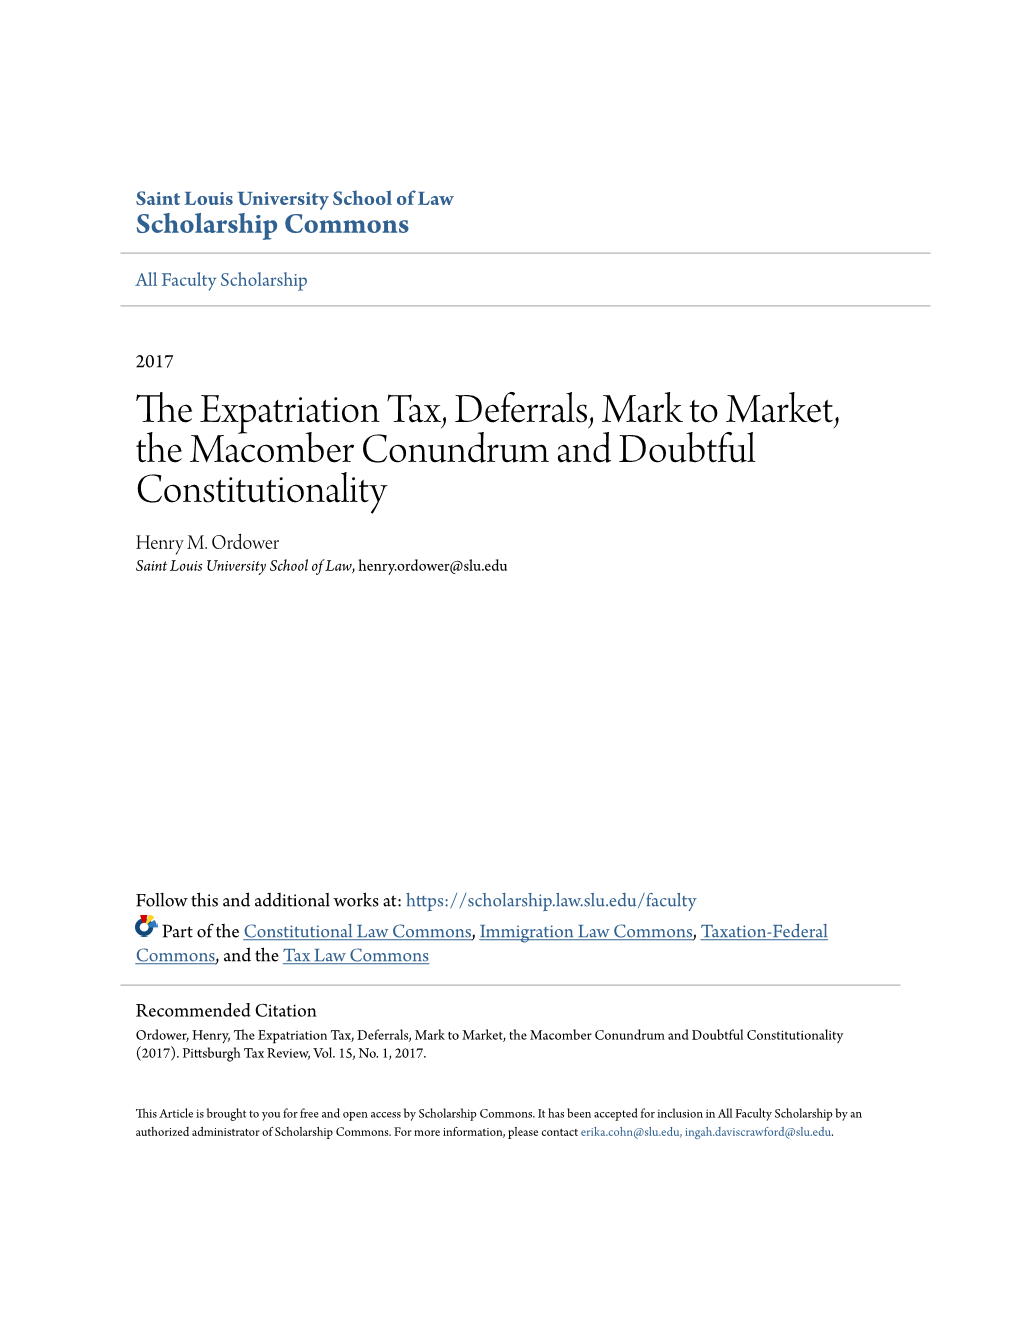 The Expatriation Tax, Deferrals, Mark to Market, the Macomber Conundrum and Doubtful Constitutionality Henry M